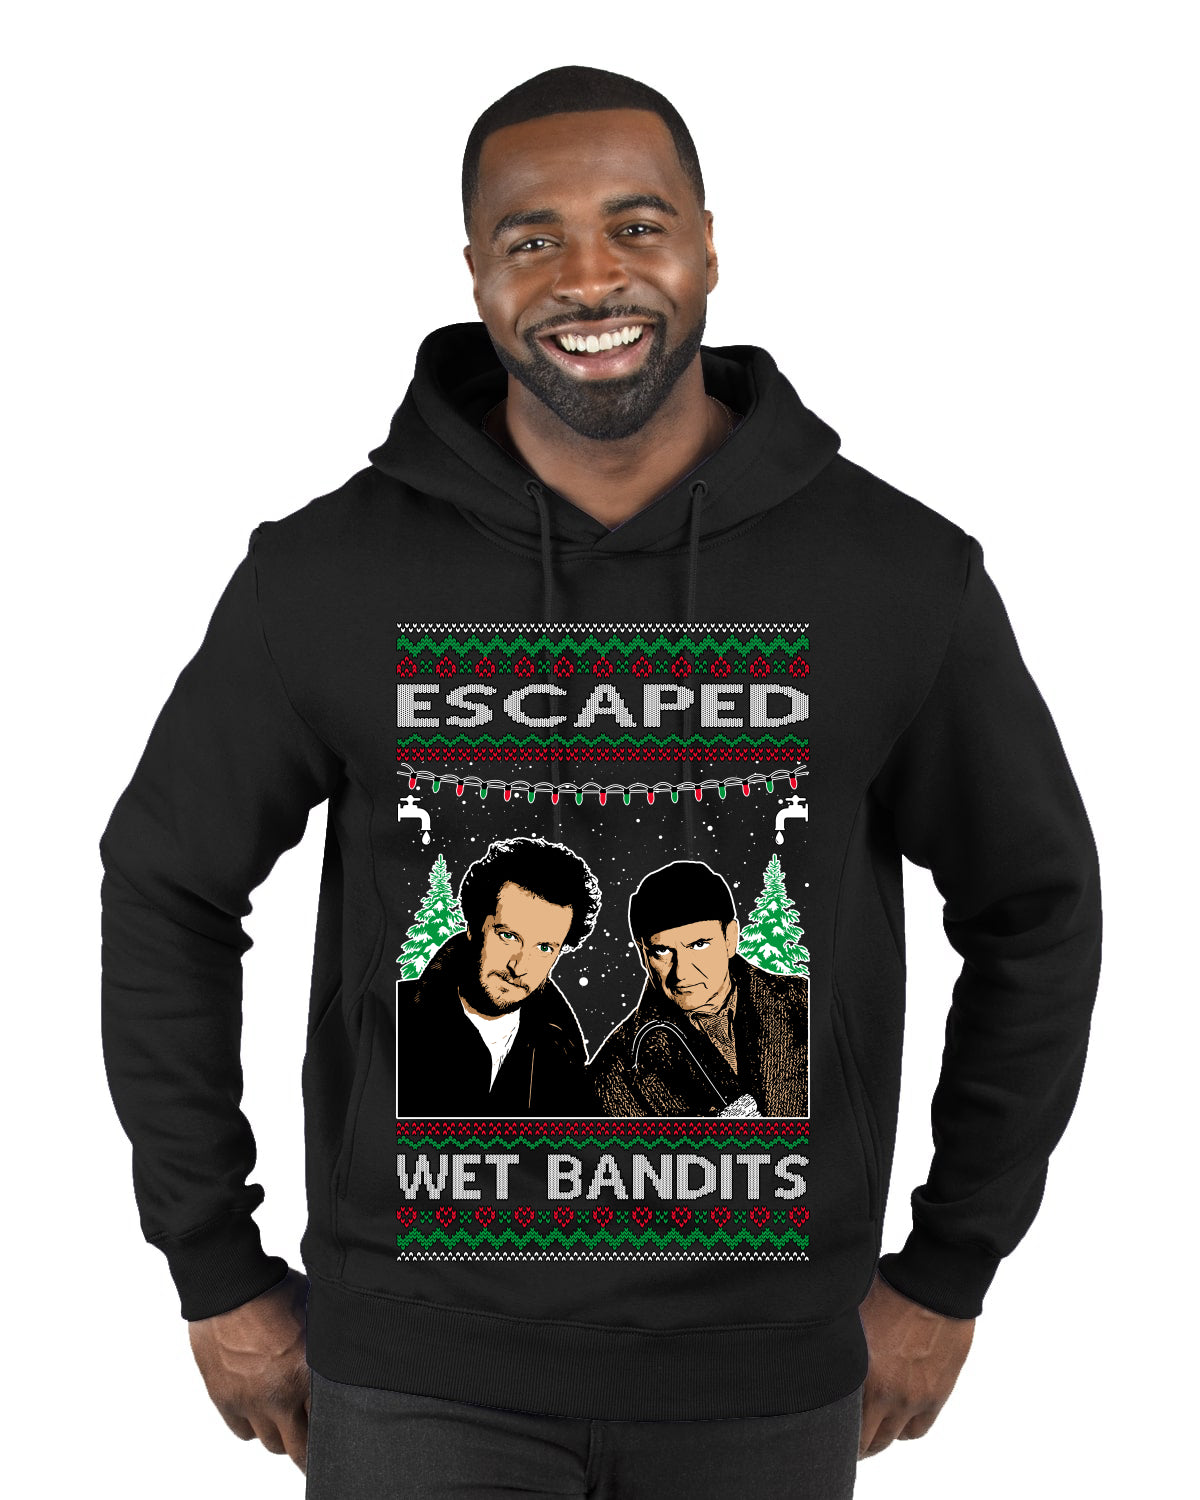 Escaped Bandits Classic Home Holiday Movie Ugly Christmas Sweater Premium Graphic Hoodie Sweatshirt